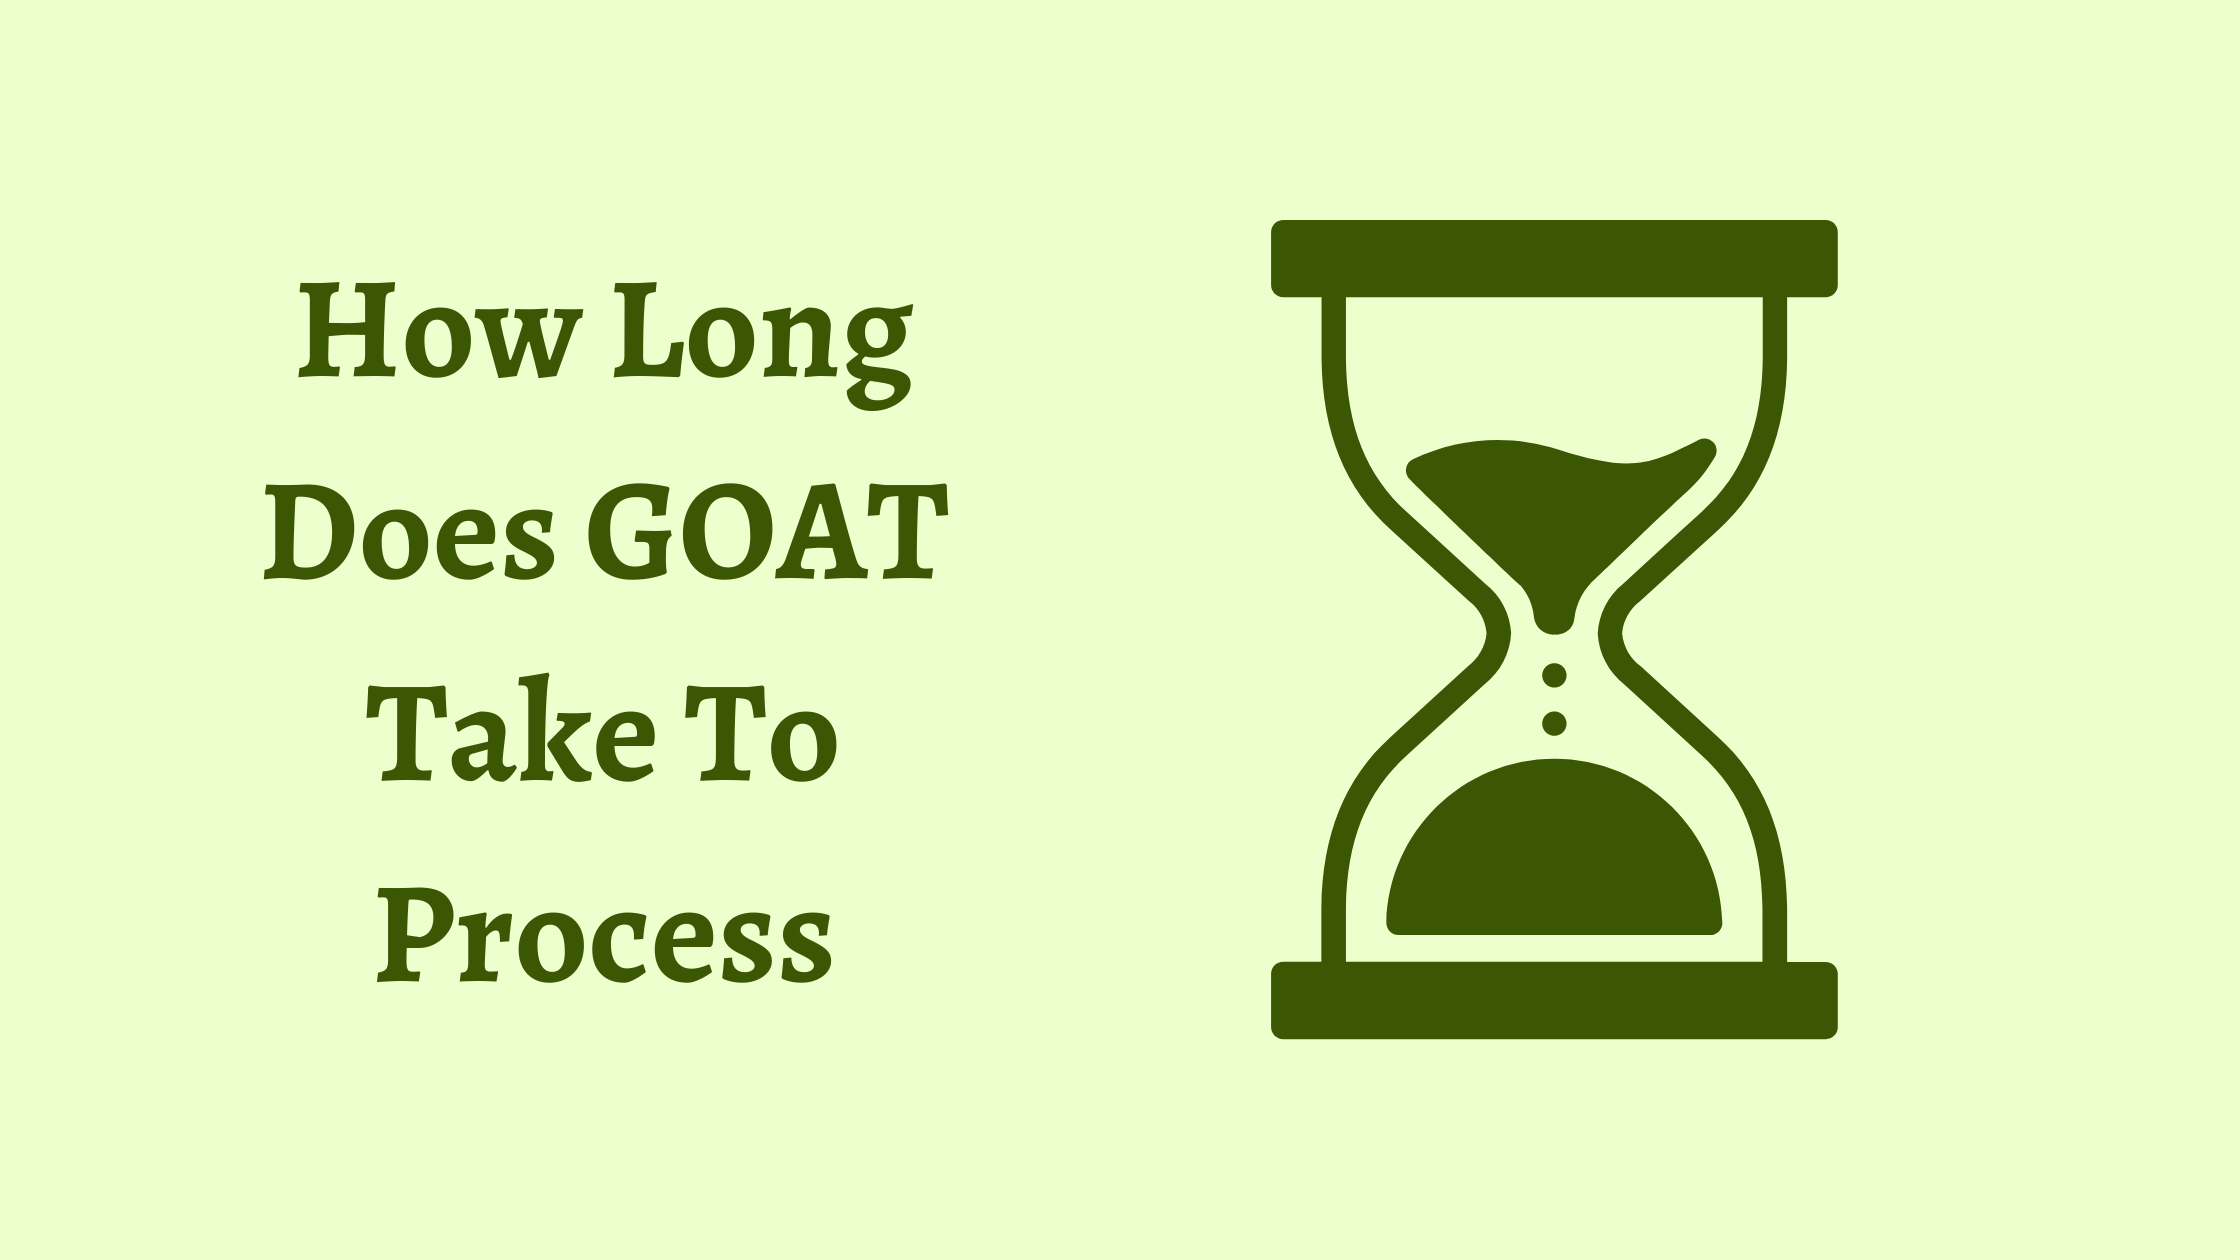 How Long Does GOAT Take To Process